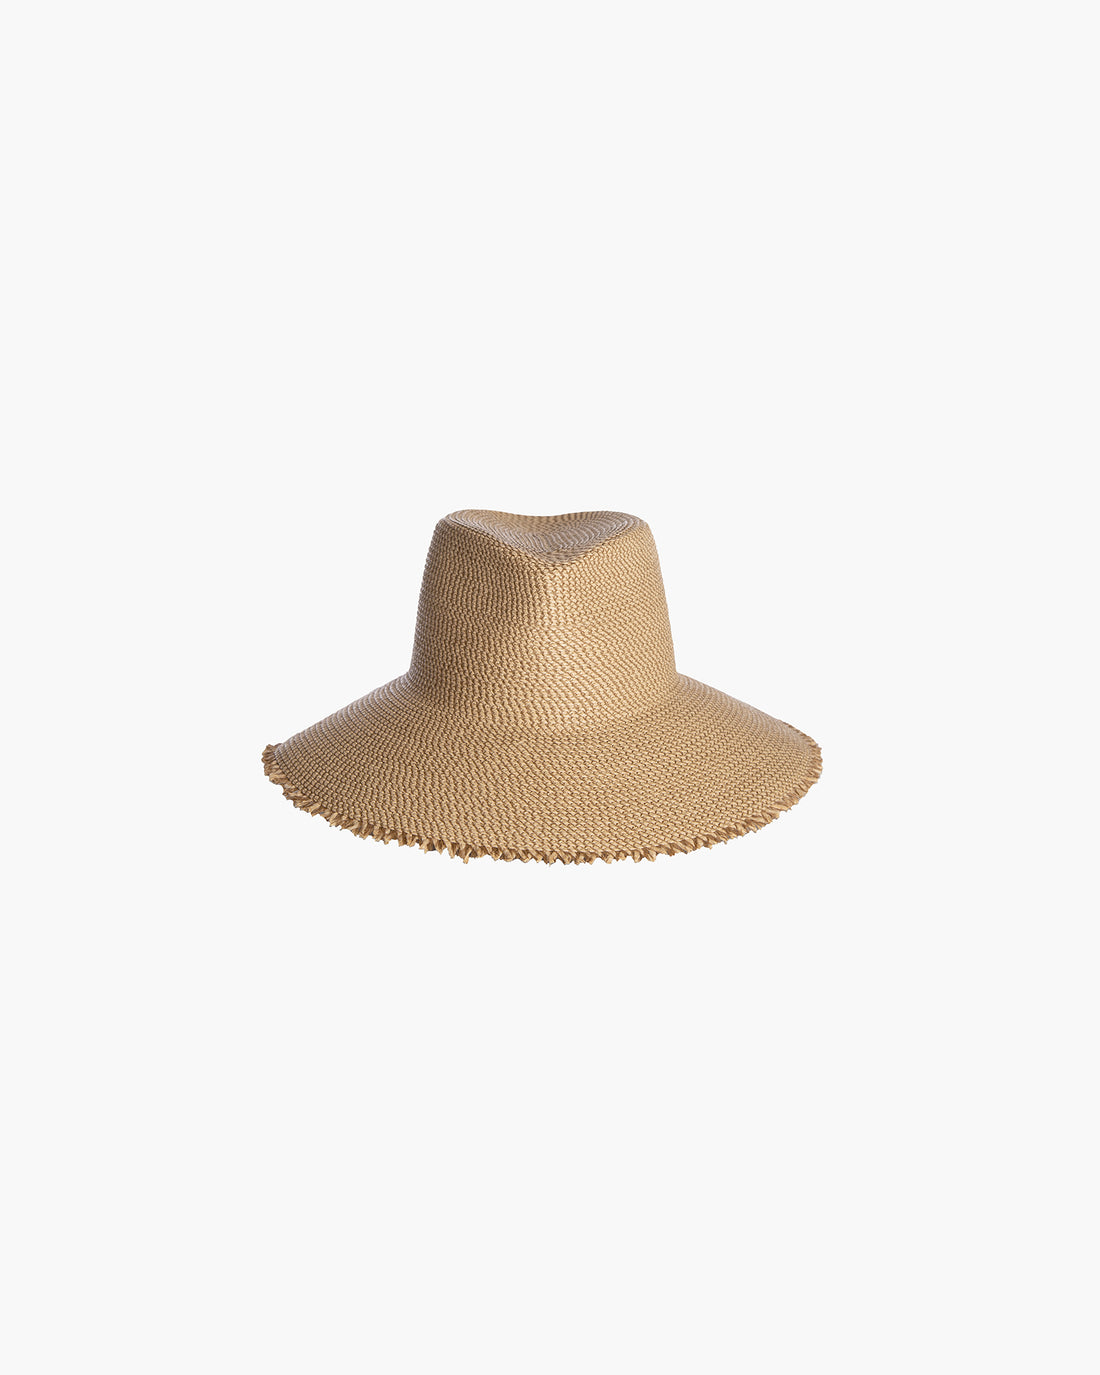 Squishee® A List｜Packable Fedora Hat | Eric Javits